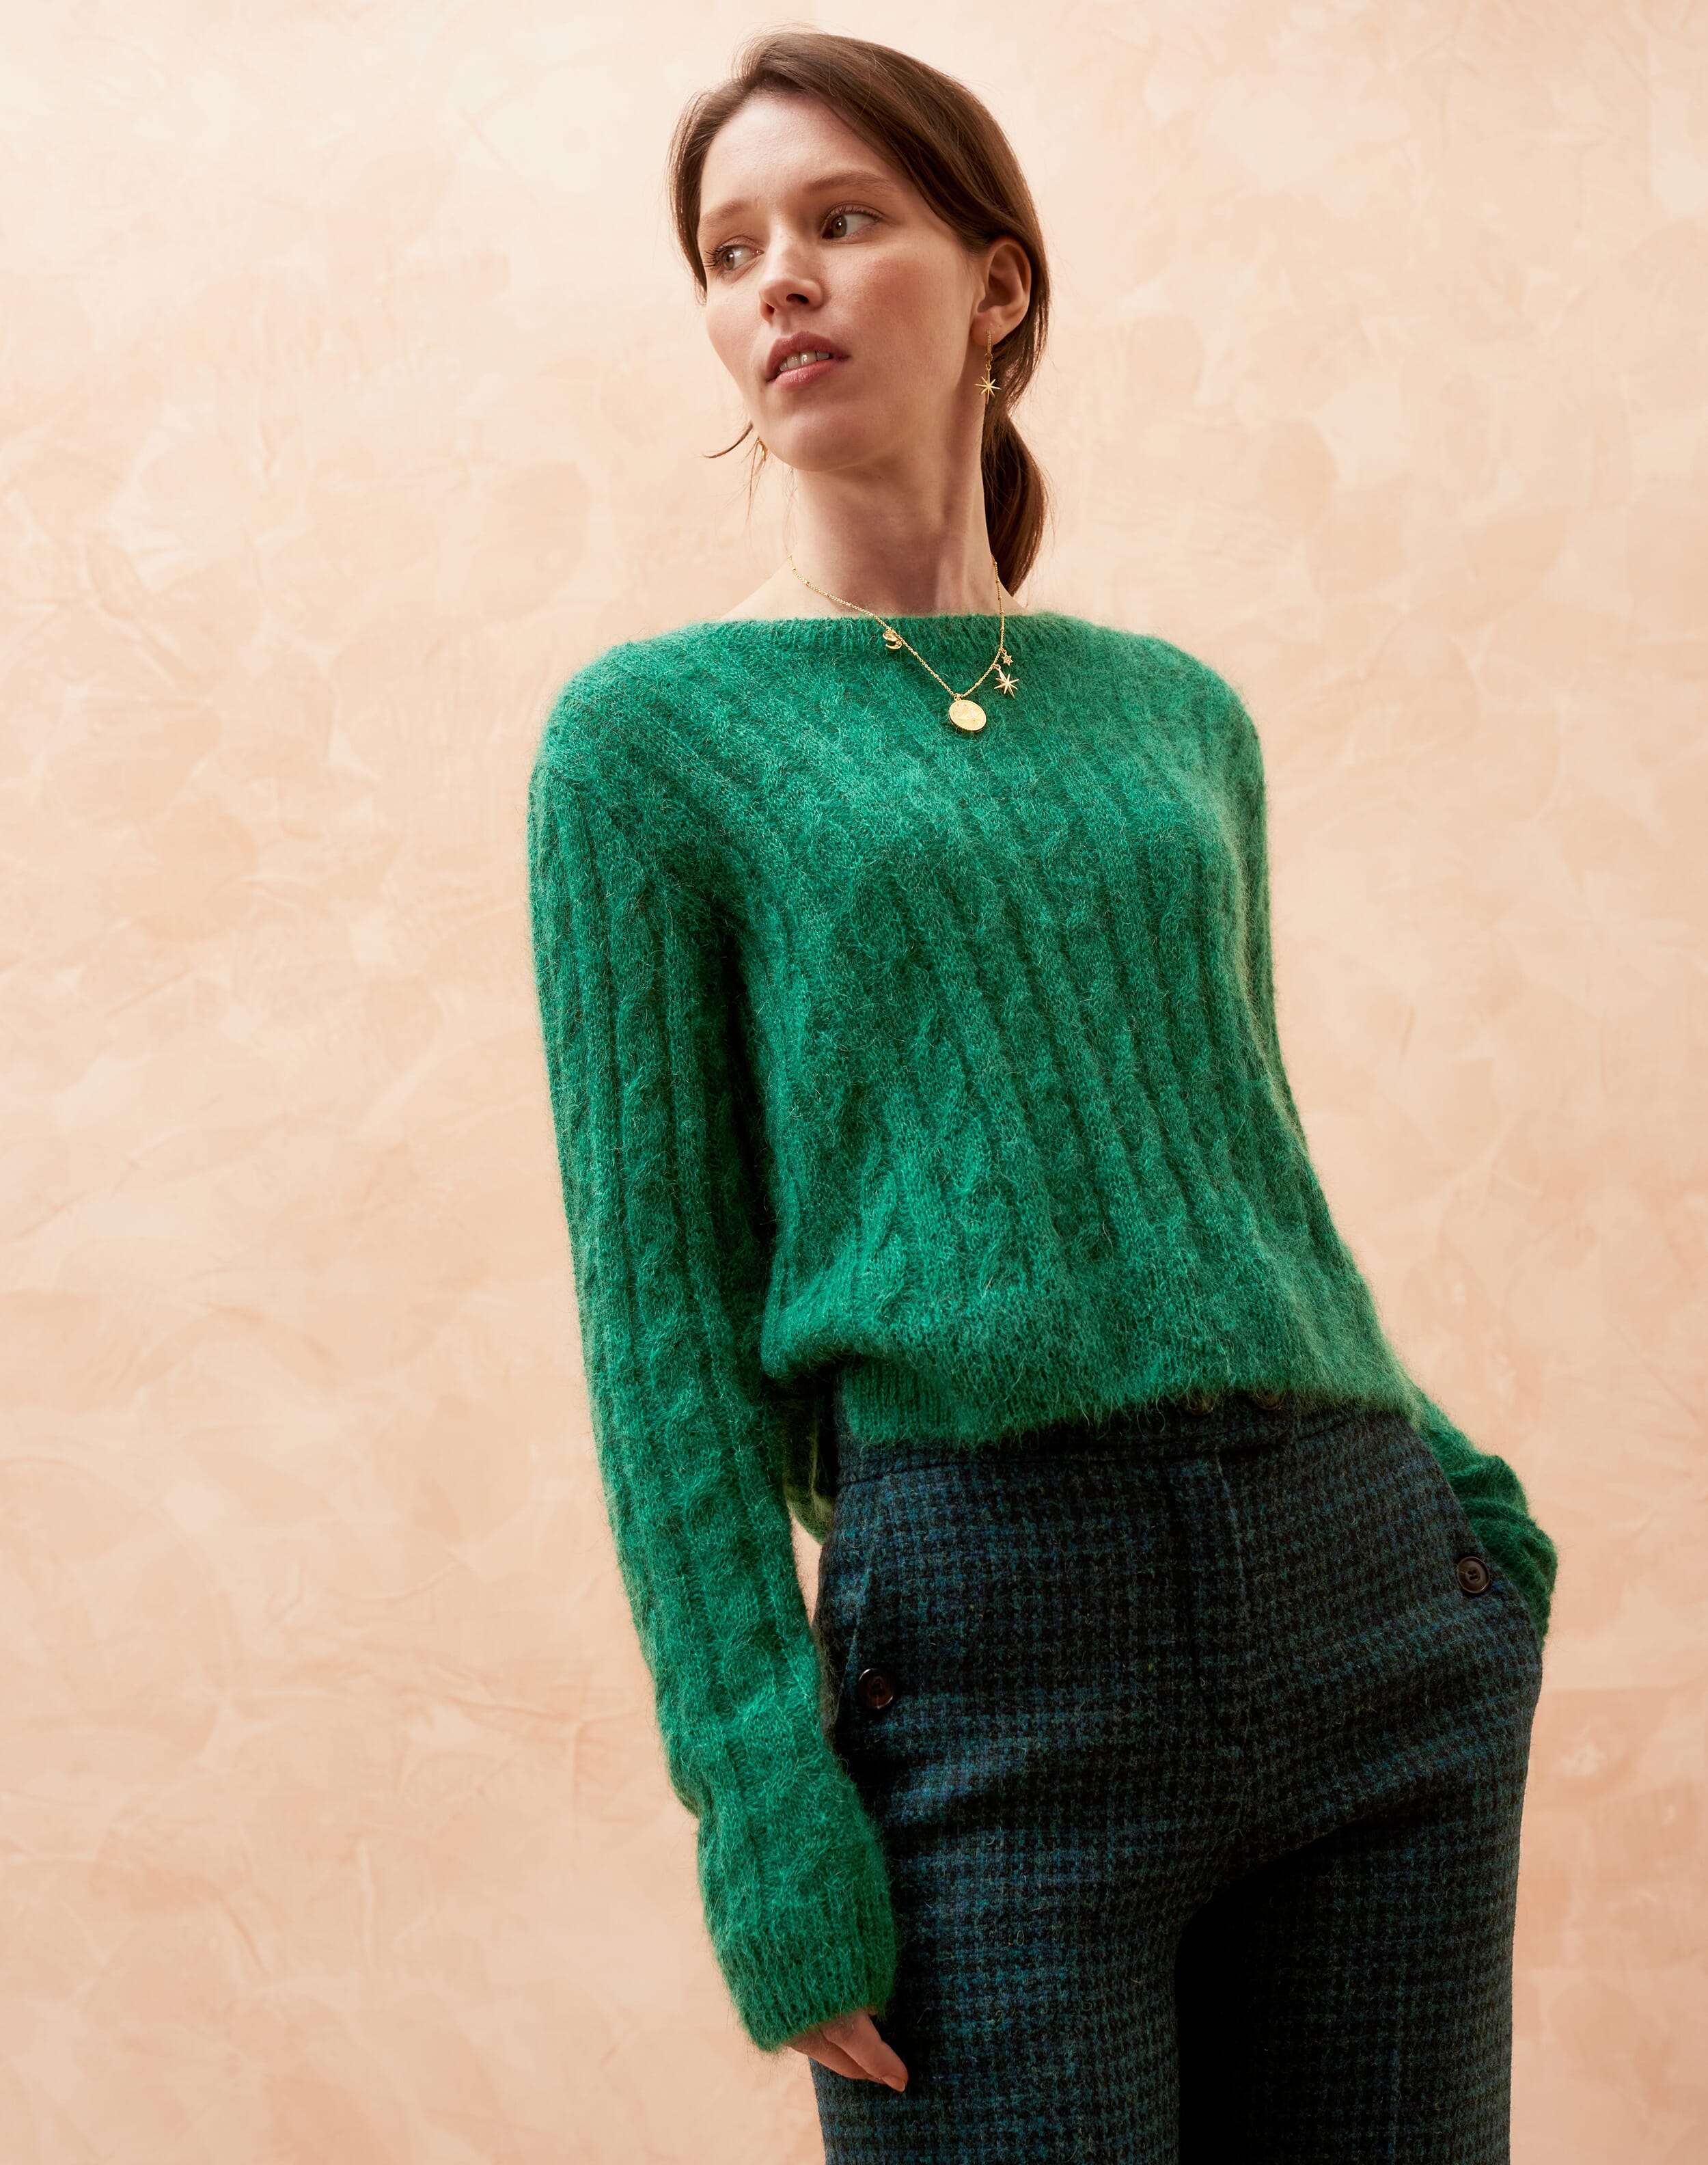 Mohair Cable Jumper in Emerald | Women's Knitwear | Brora